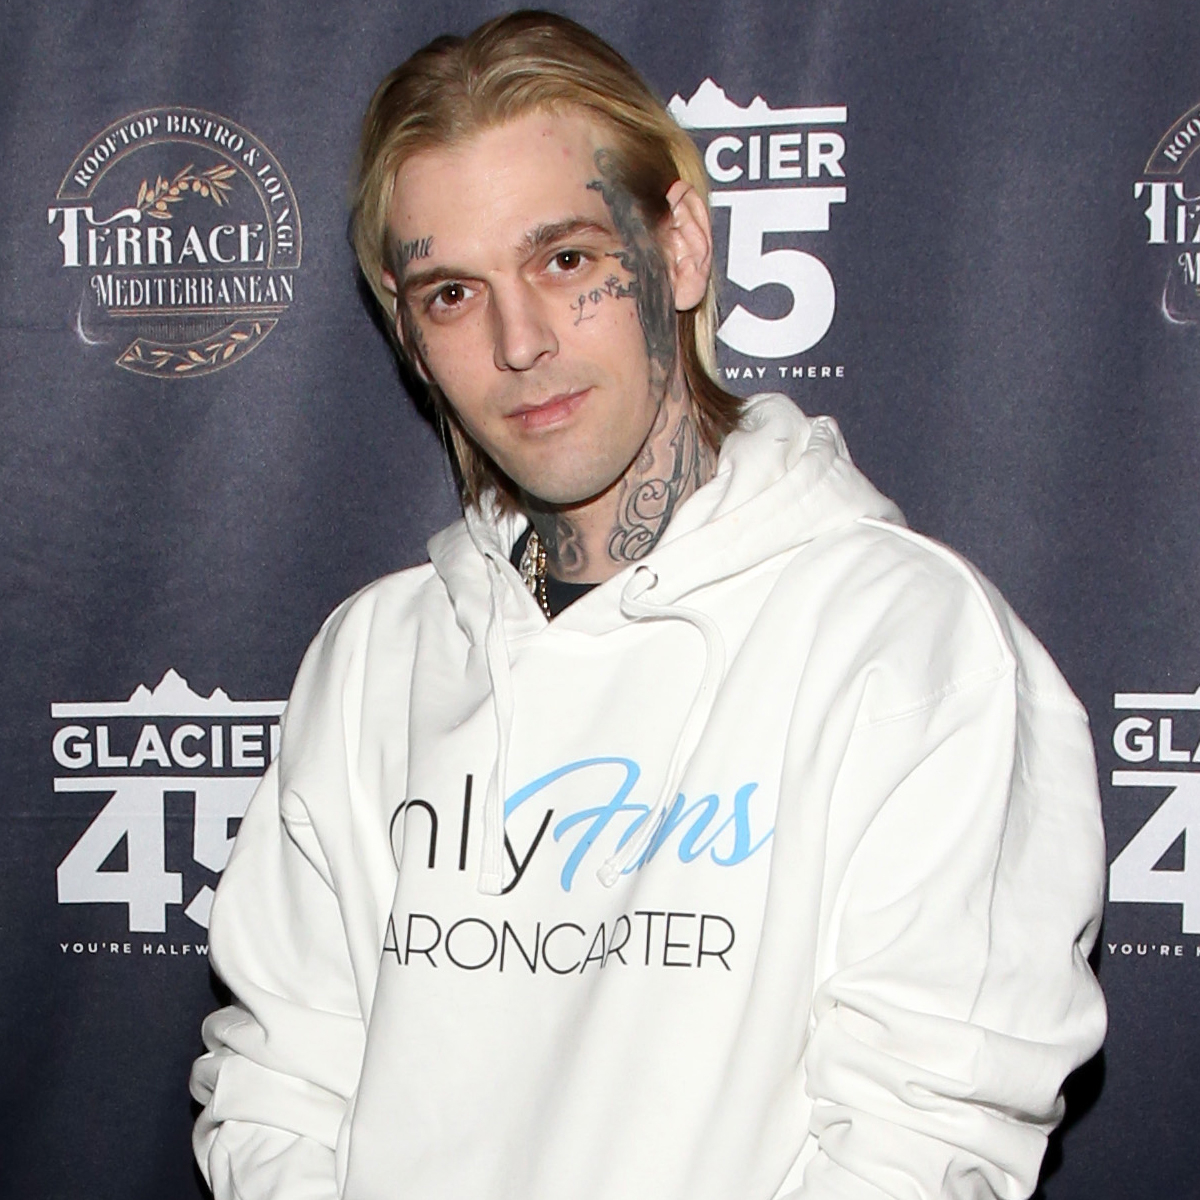 Aaron Carter Dead at 34: New Kids on the Block and Others Pay Tribute